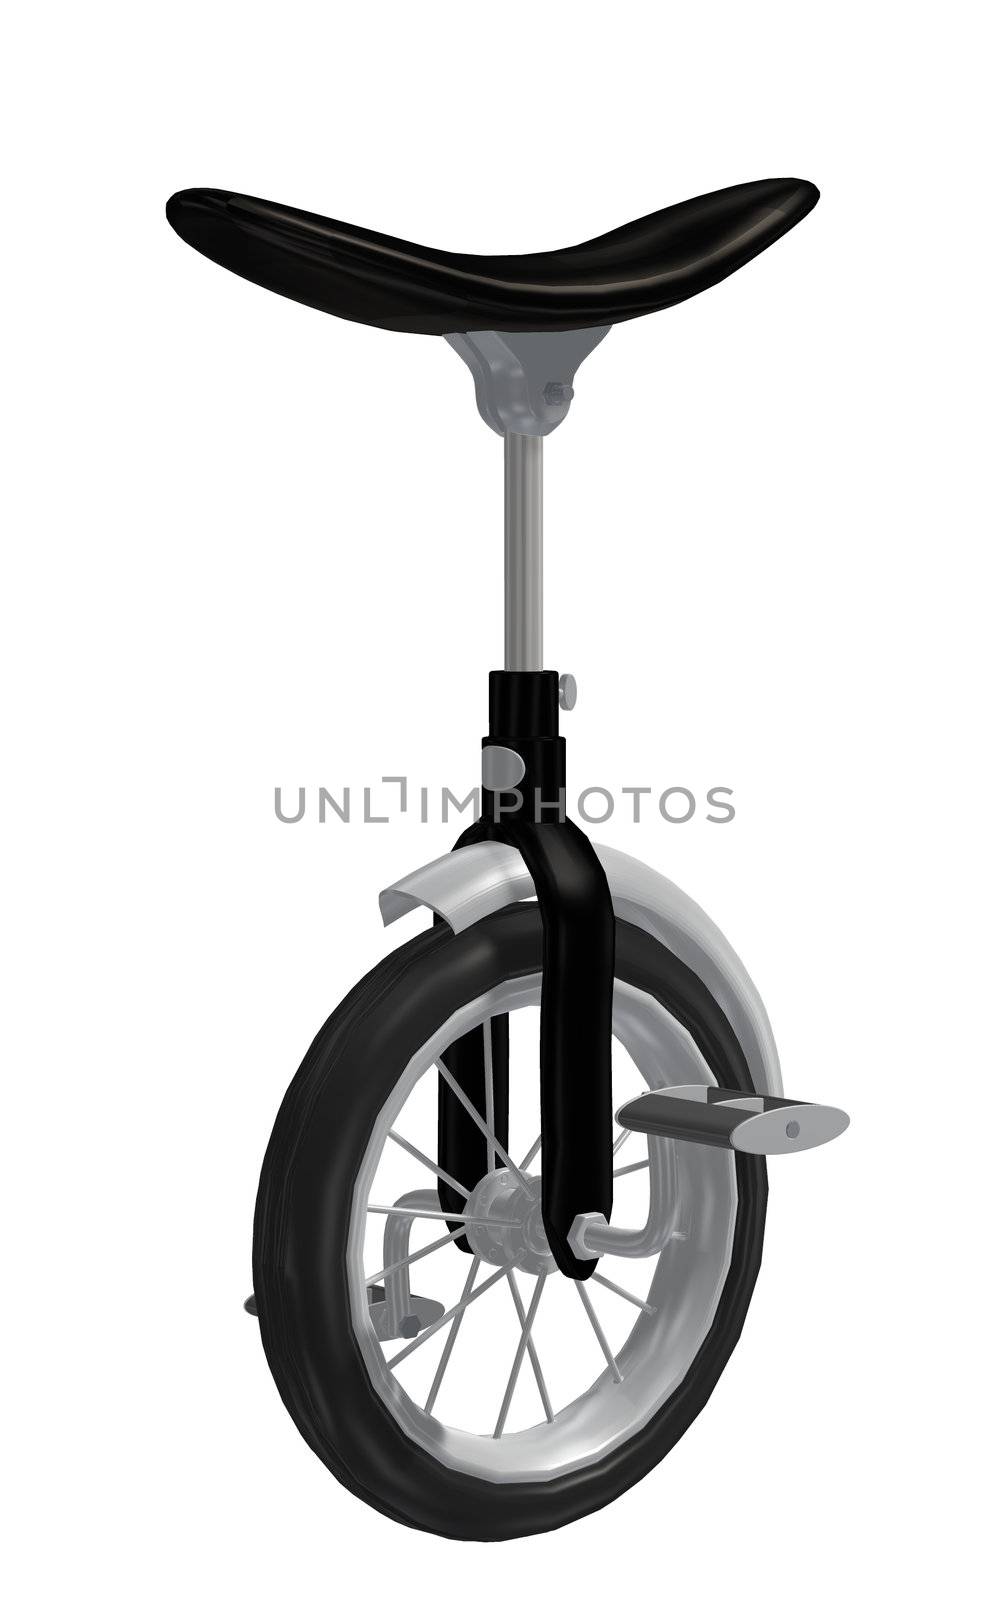 Unicycle by kathygold